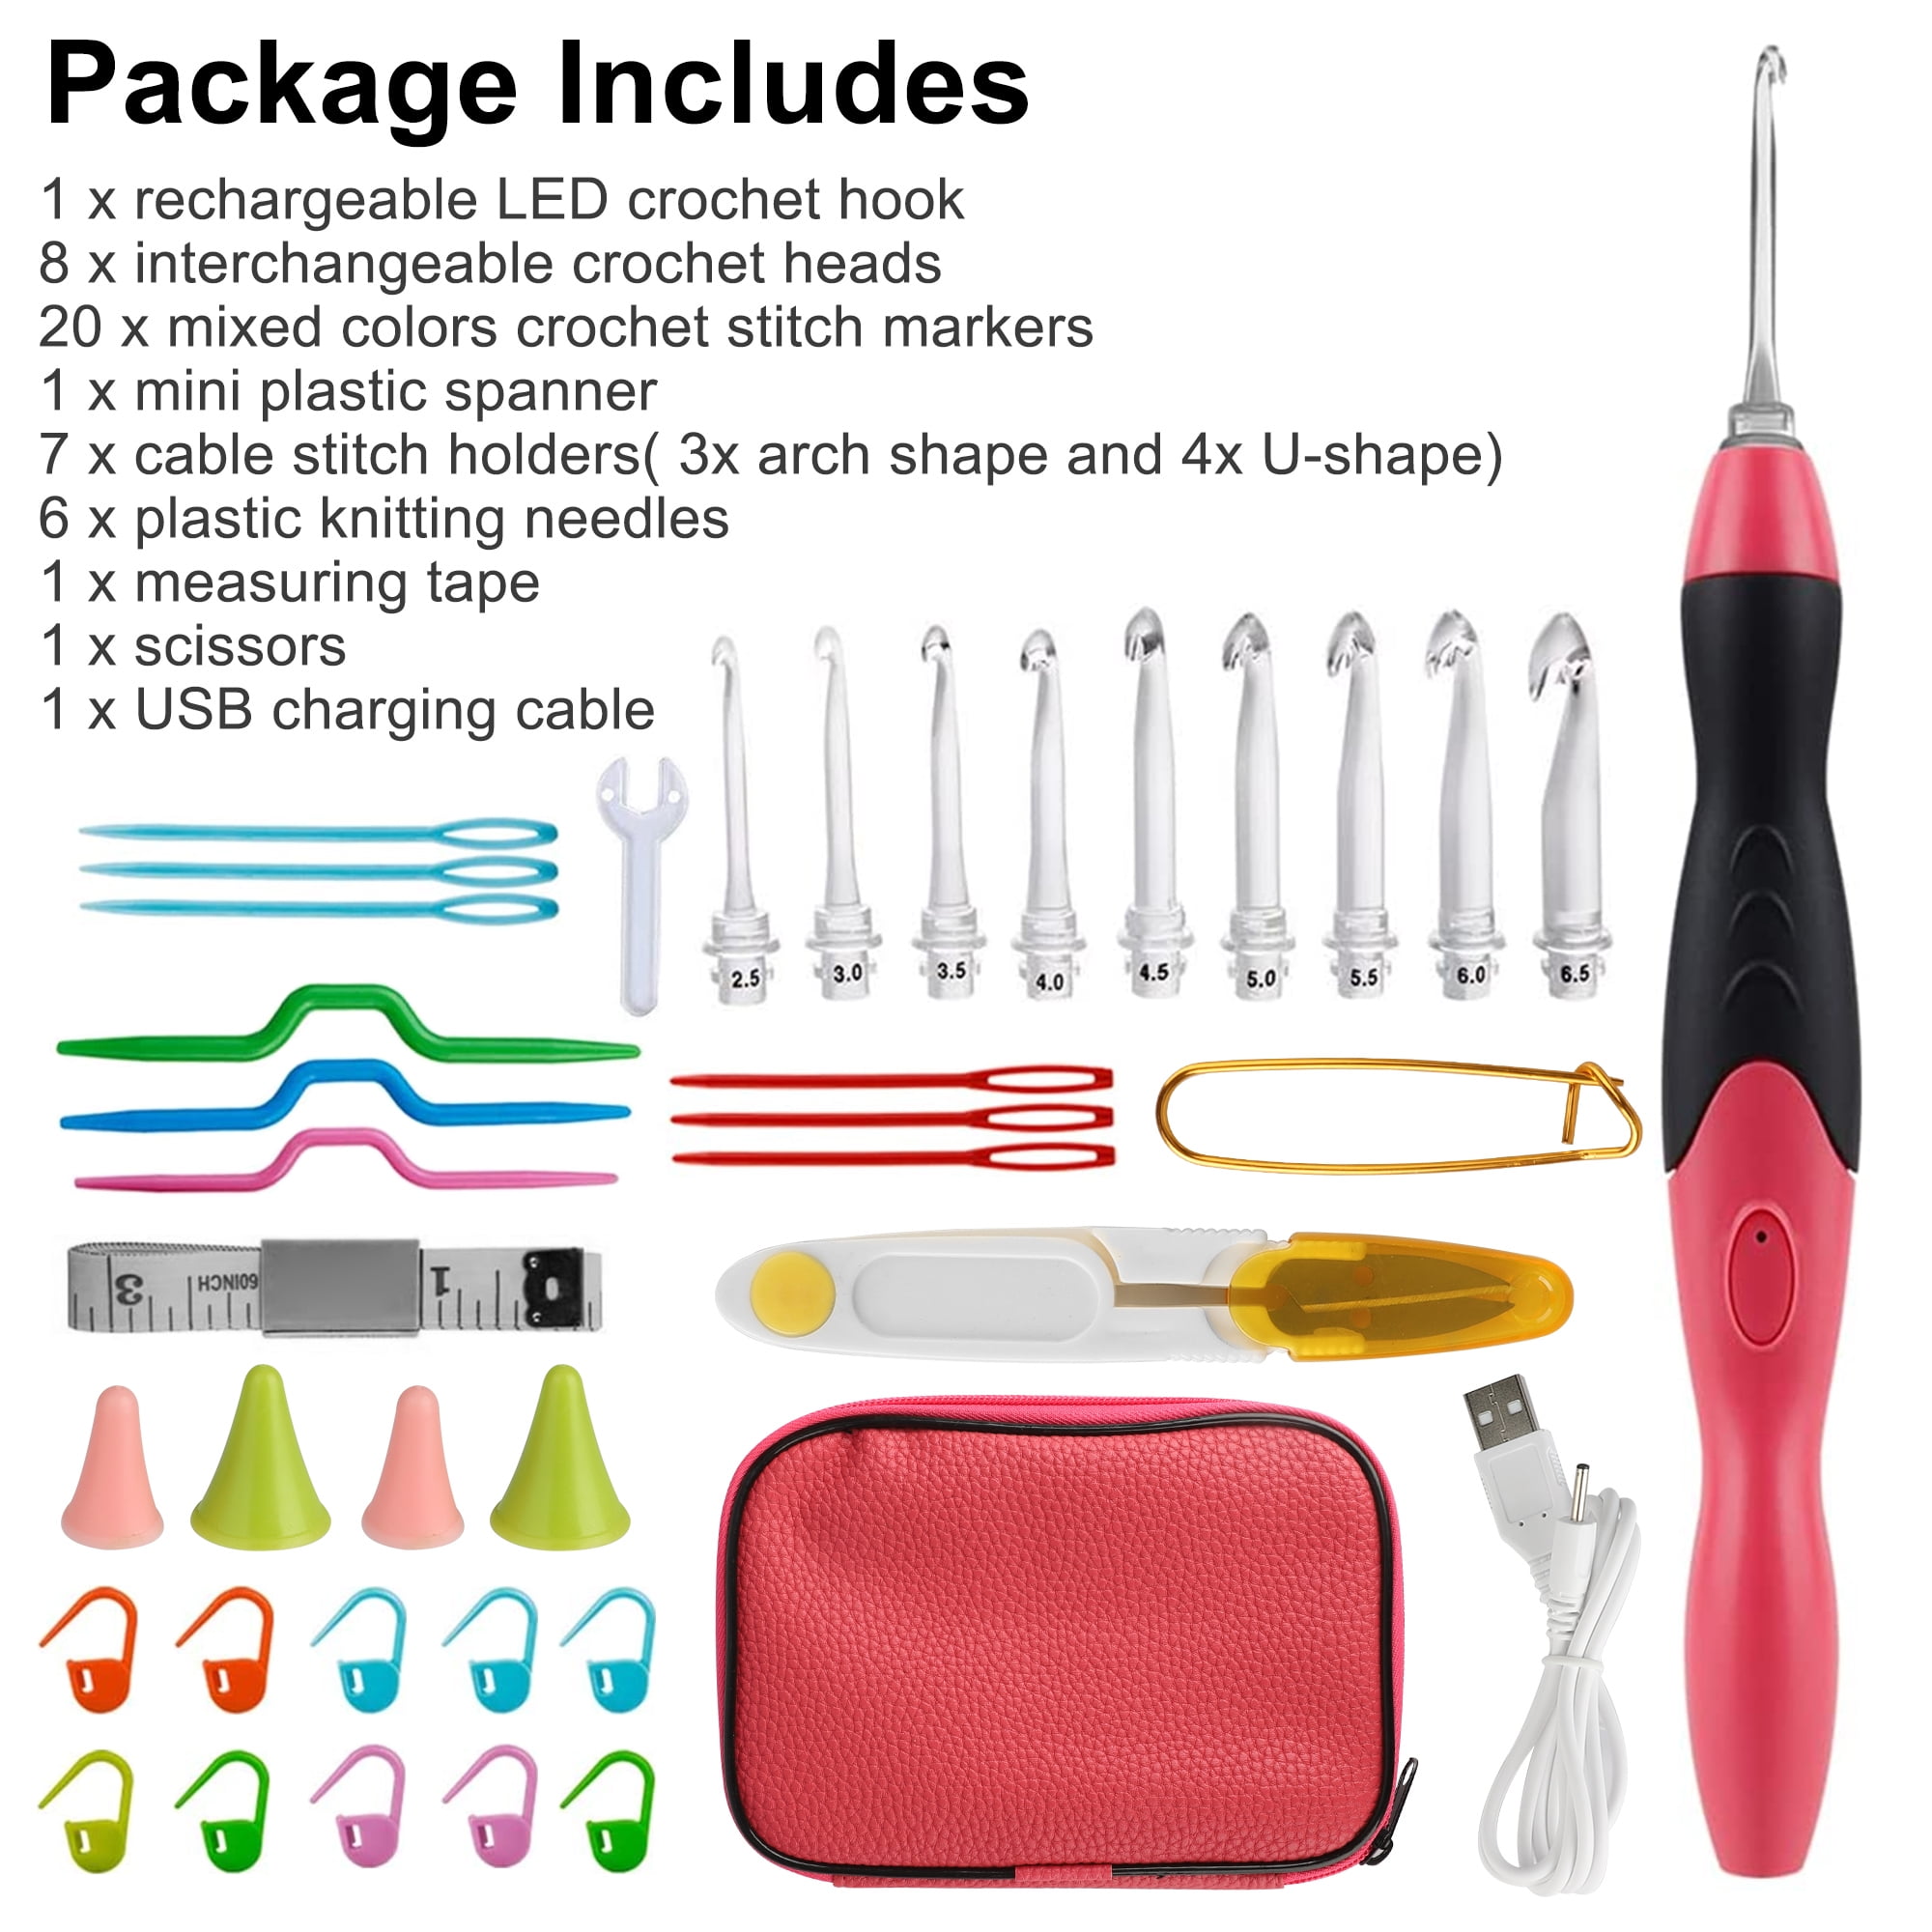 Yarniss Lighted Crochet Hooks Set- Rechargeable Crochet Hook with Latest Case, 9 in 1 Interchangeable Heads Light Crochet Hooks with Accessories